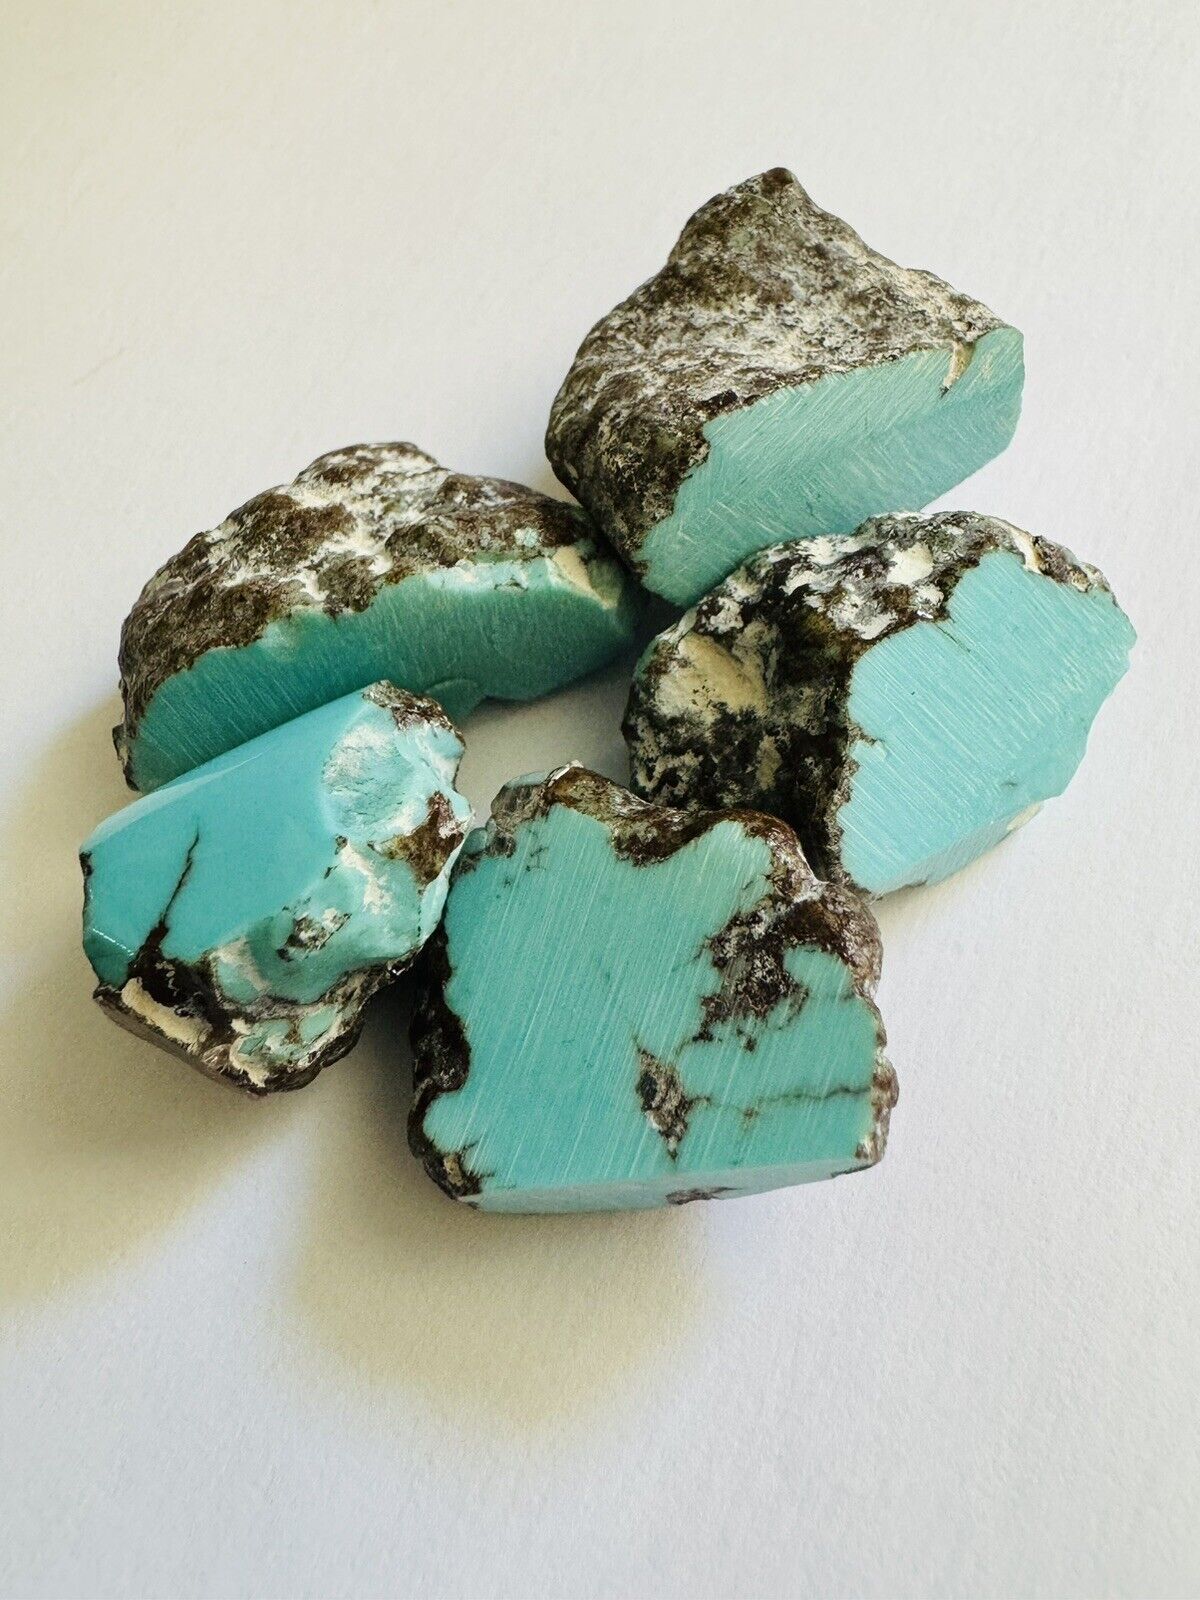 Egyptian Turquoise Nuggets - 21 grams. Matrix Free - Blue to Blue/Green